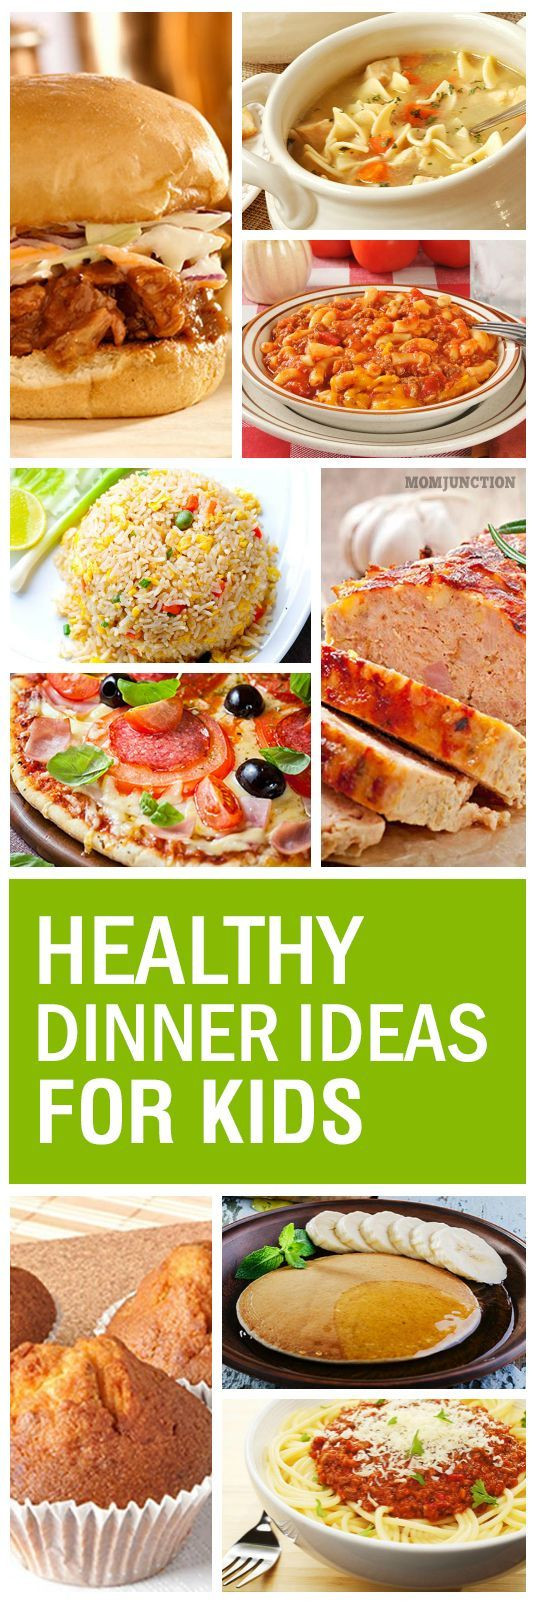 Quick Dinner Recipes For Kids
 15 Quick And Yummy Dinner Recipes For Kids